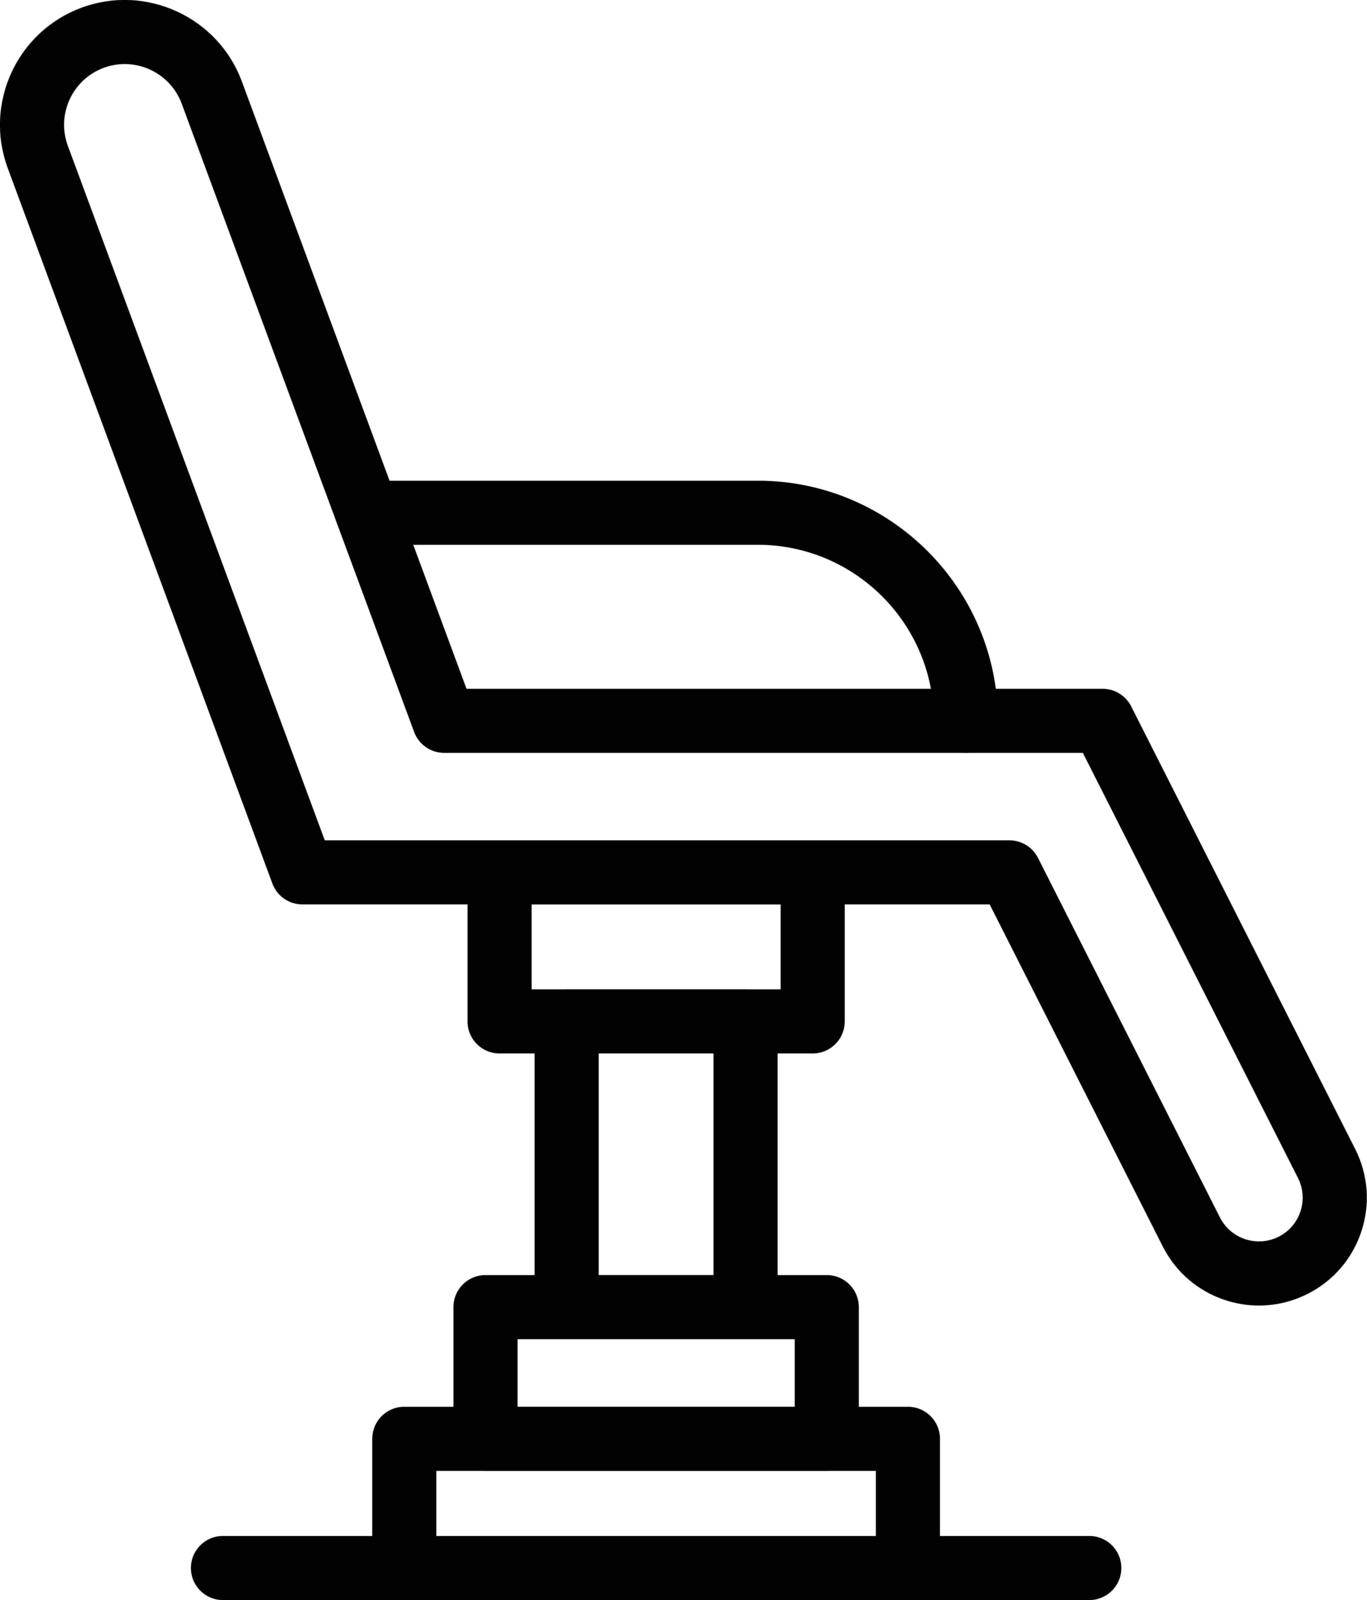 chair Vector illustration on a transparent background. Premium quality symbols. Stroke vector icon for concept and graphic design.